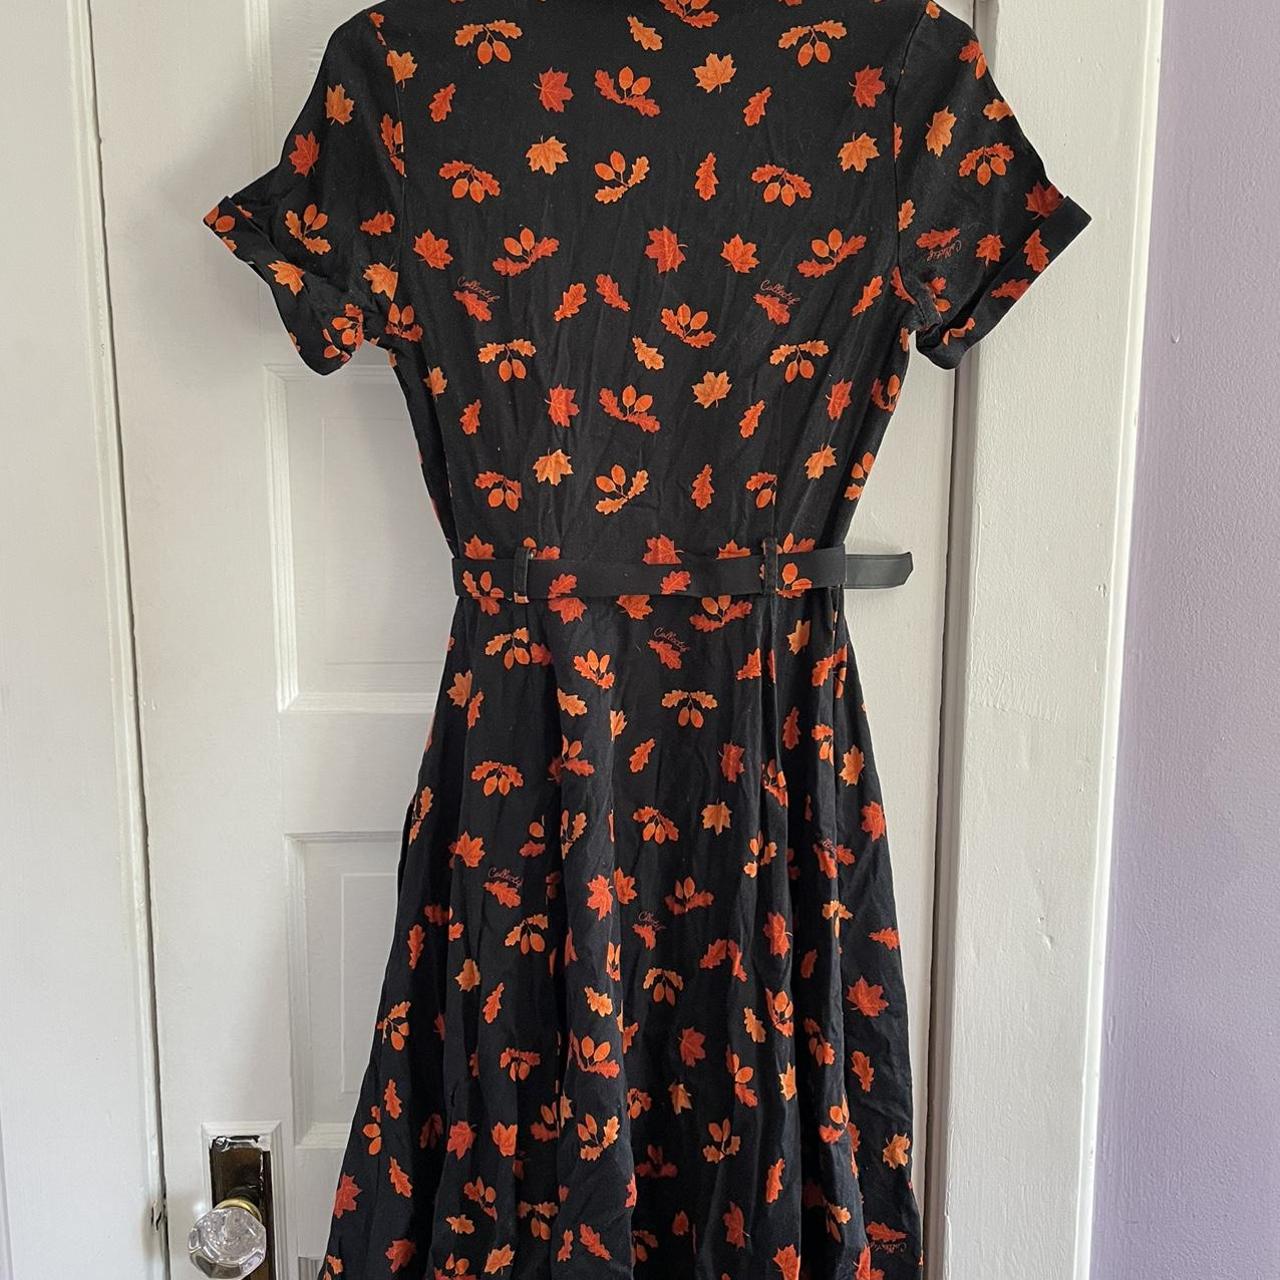 Product Image 4 - Collectif discontinued Autumn Acorn Dress
Size